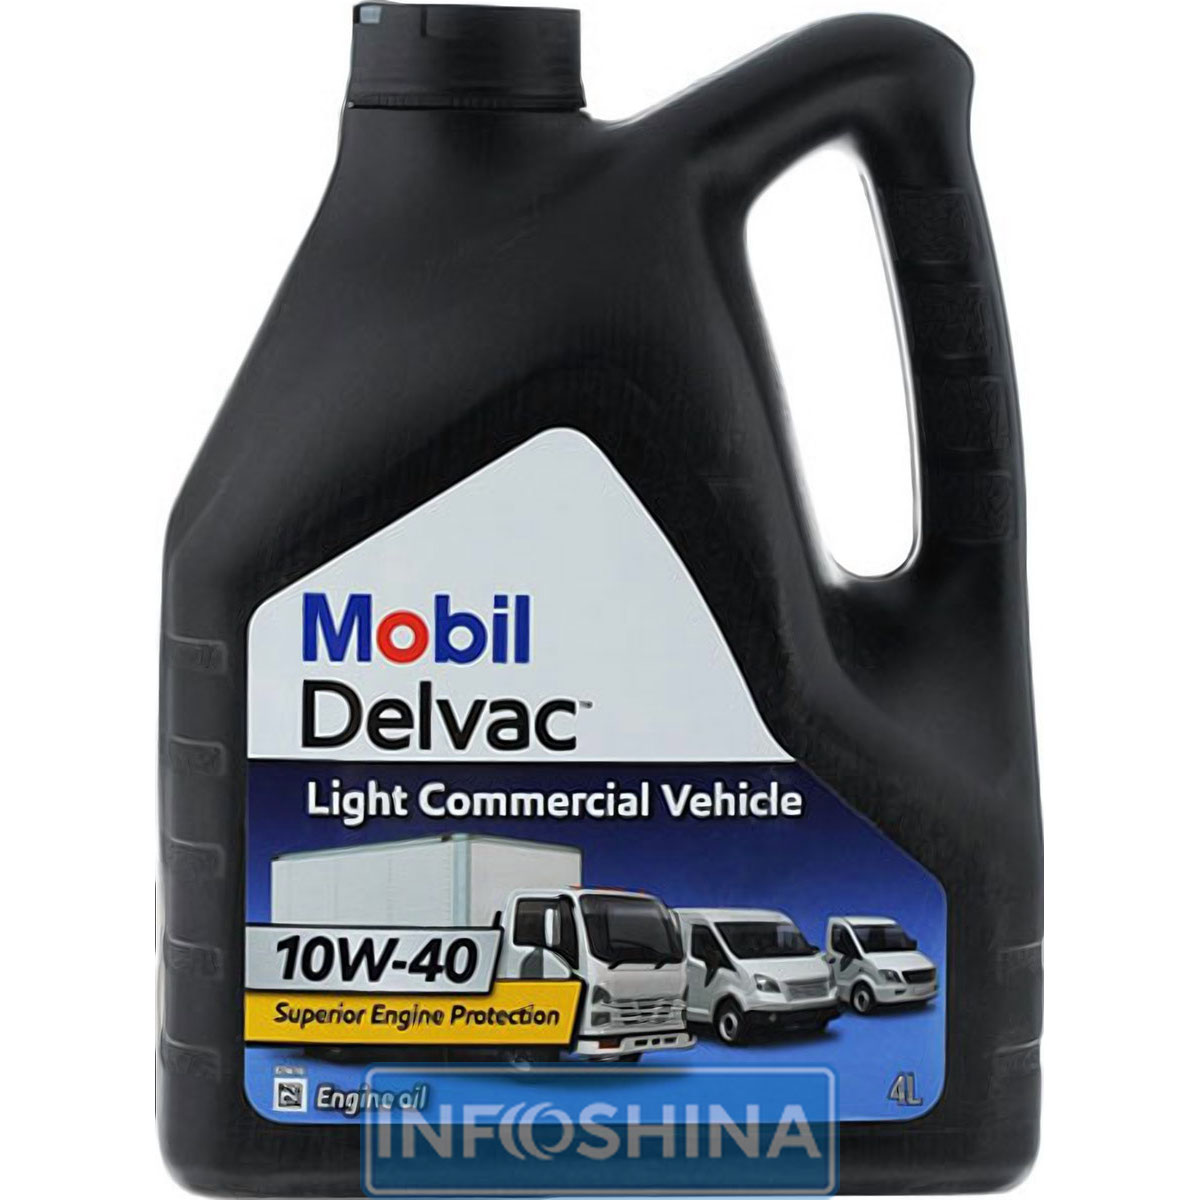 Mobil Delvac Light Commercial Vehicle 10W-40